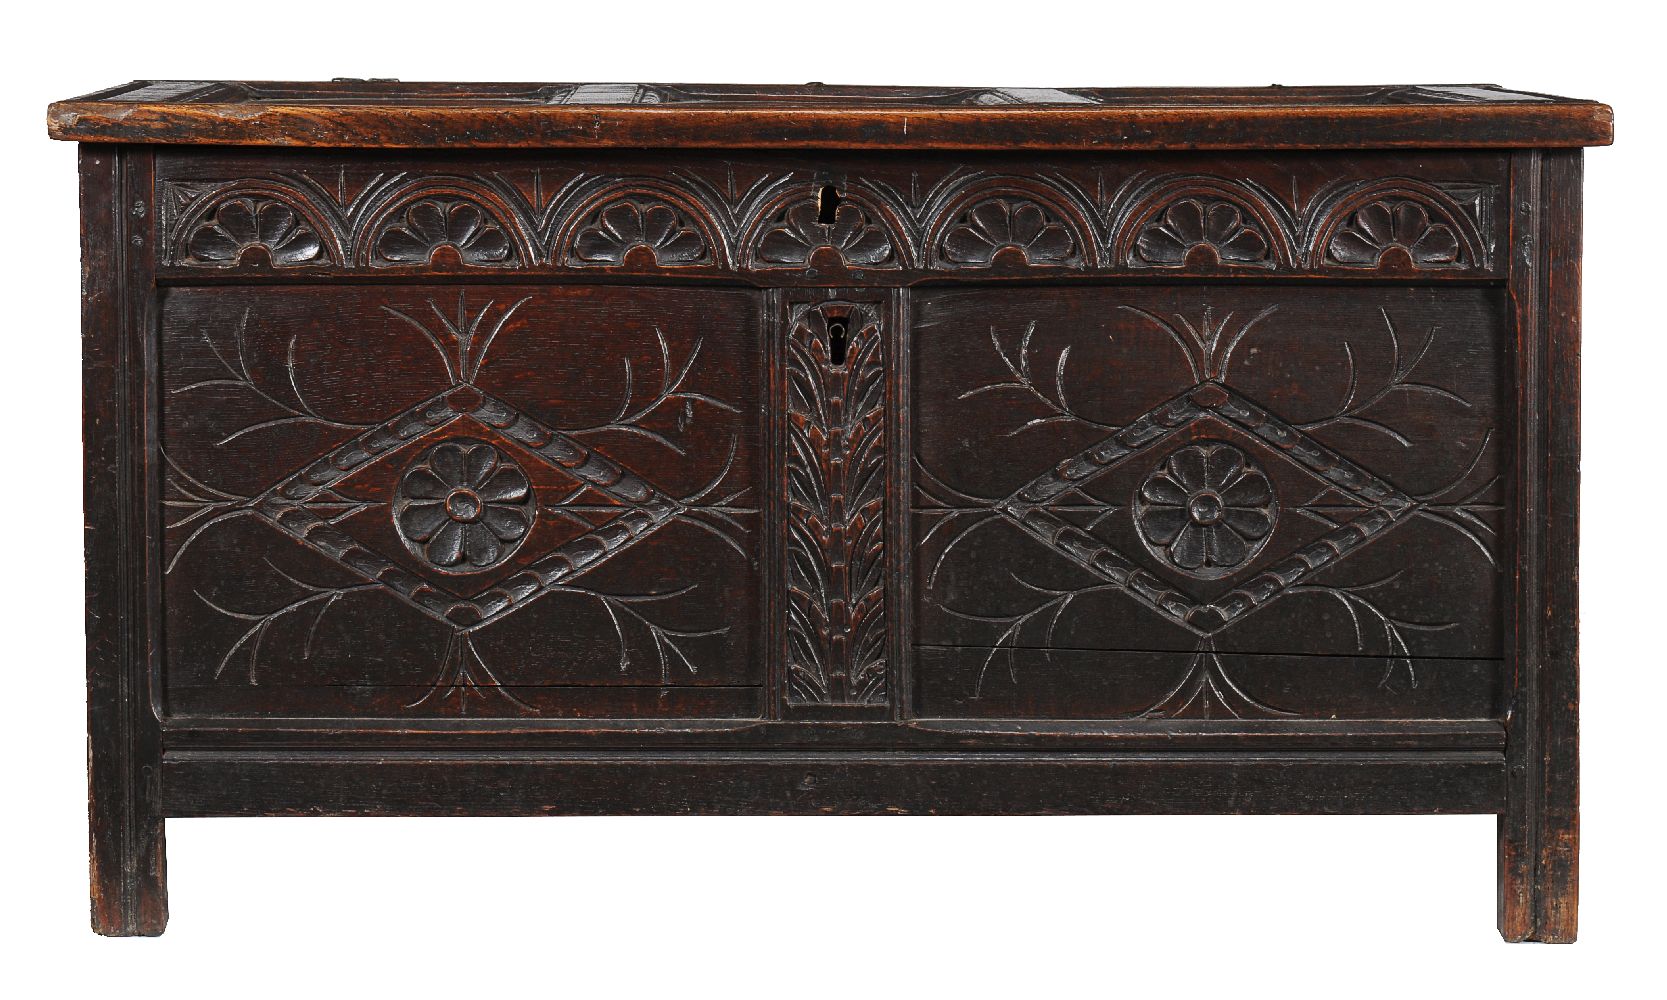 A Charles II panelled oak chest - Image 2 of 2